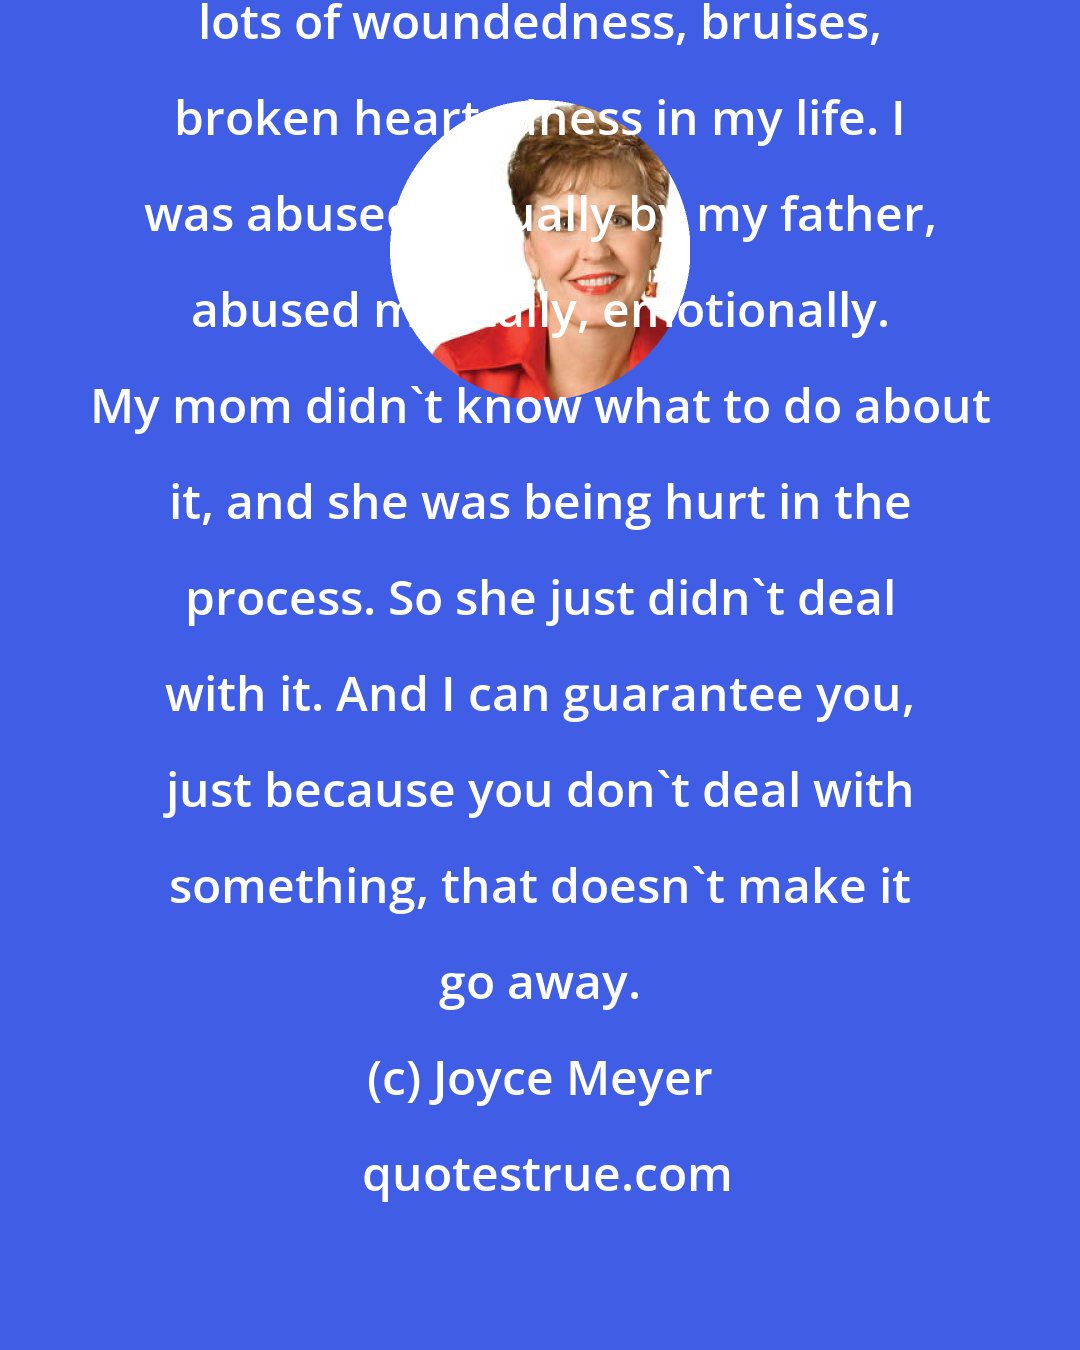 Joyce Meyer: I had lots of hurt and lots of pain, lots of woundedness, bruises, broken heartedness in my life. I was abused sexually by my father, abused mentally, emotionally. My mom didn't know what to do about it, and she was being hurt in the process. So she just didn't deal with it. And I can guarantee you, just because you don't deal with something, that doesn't make it go away.